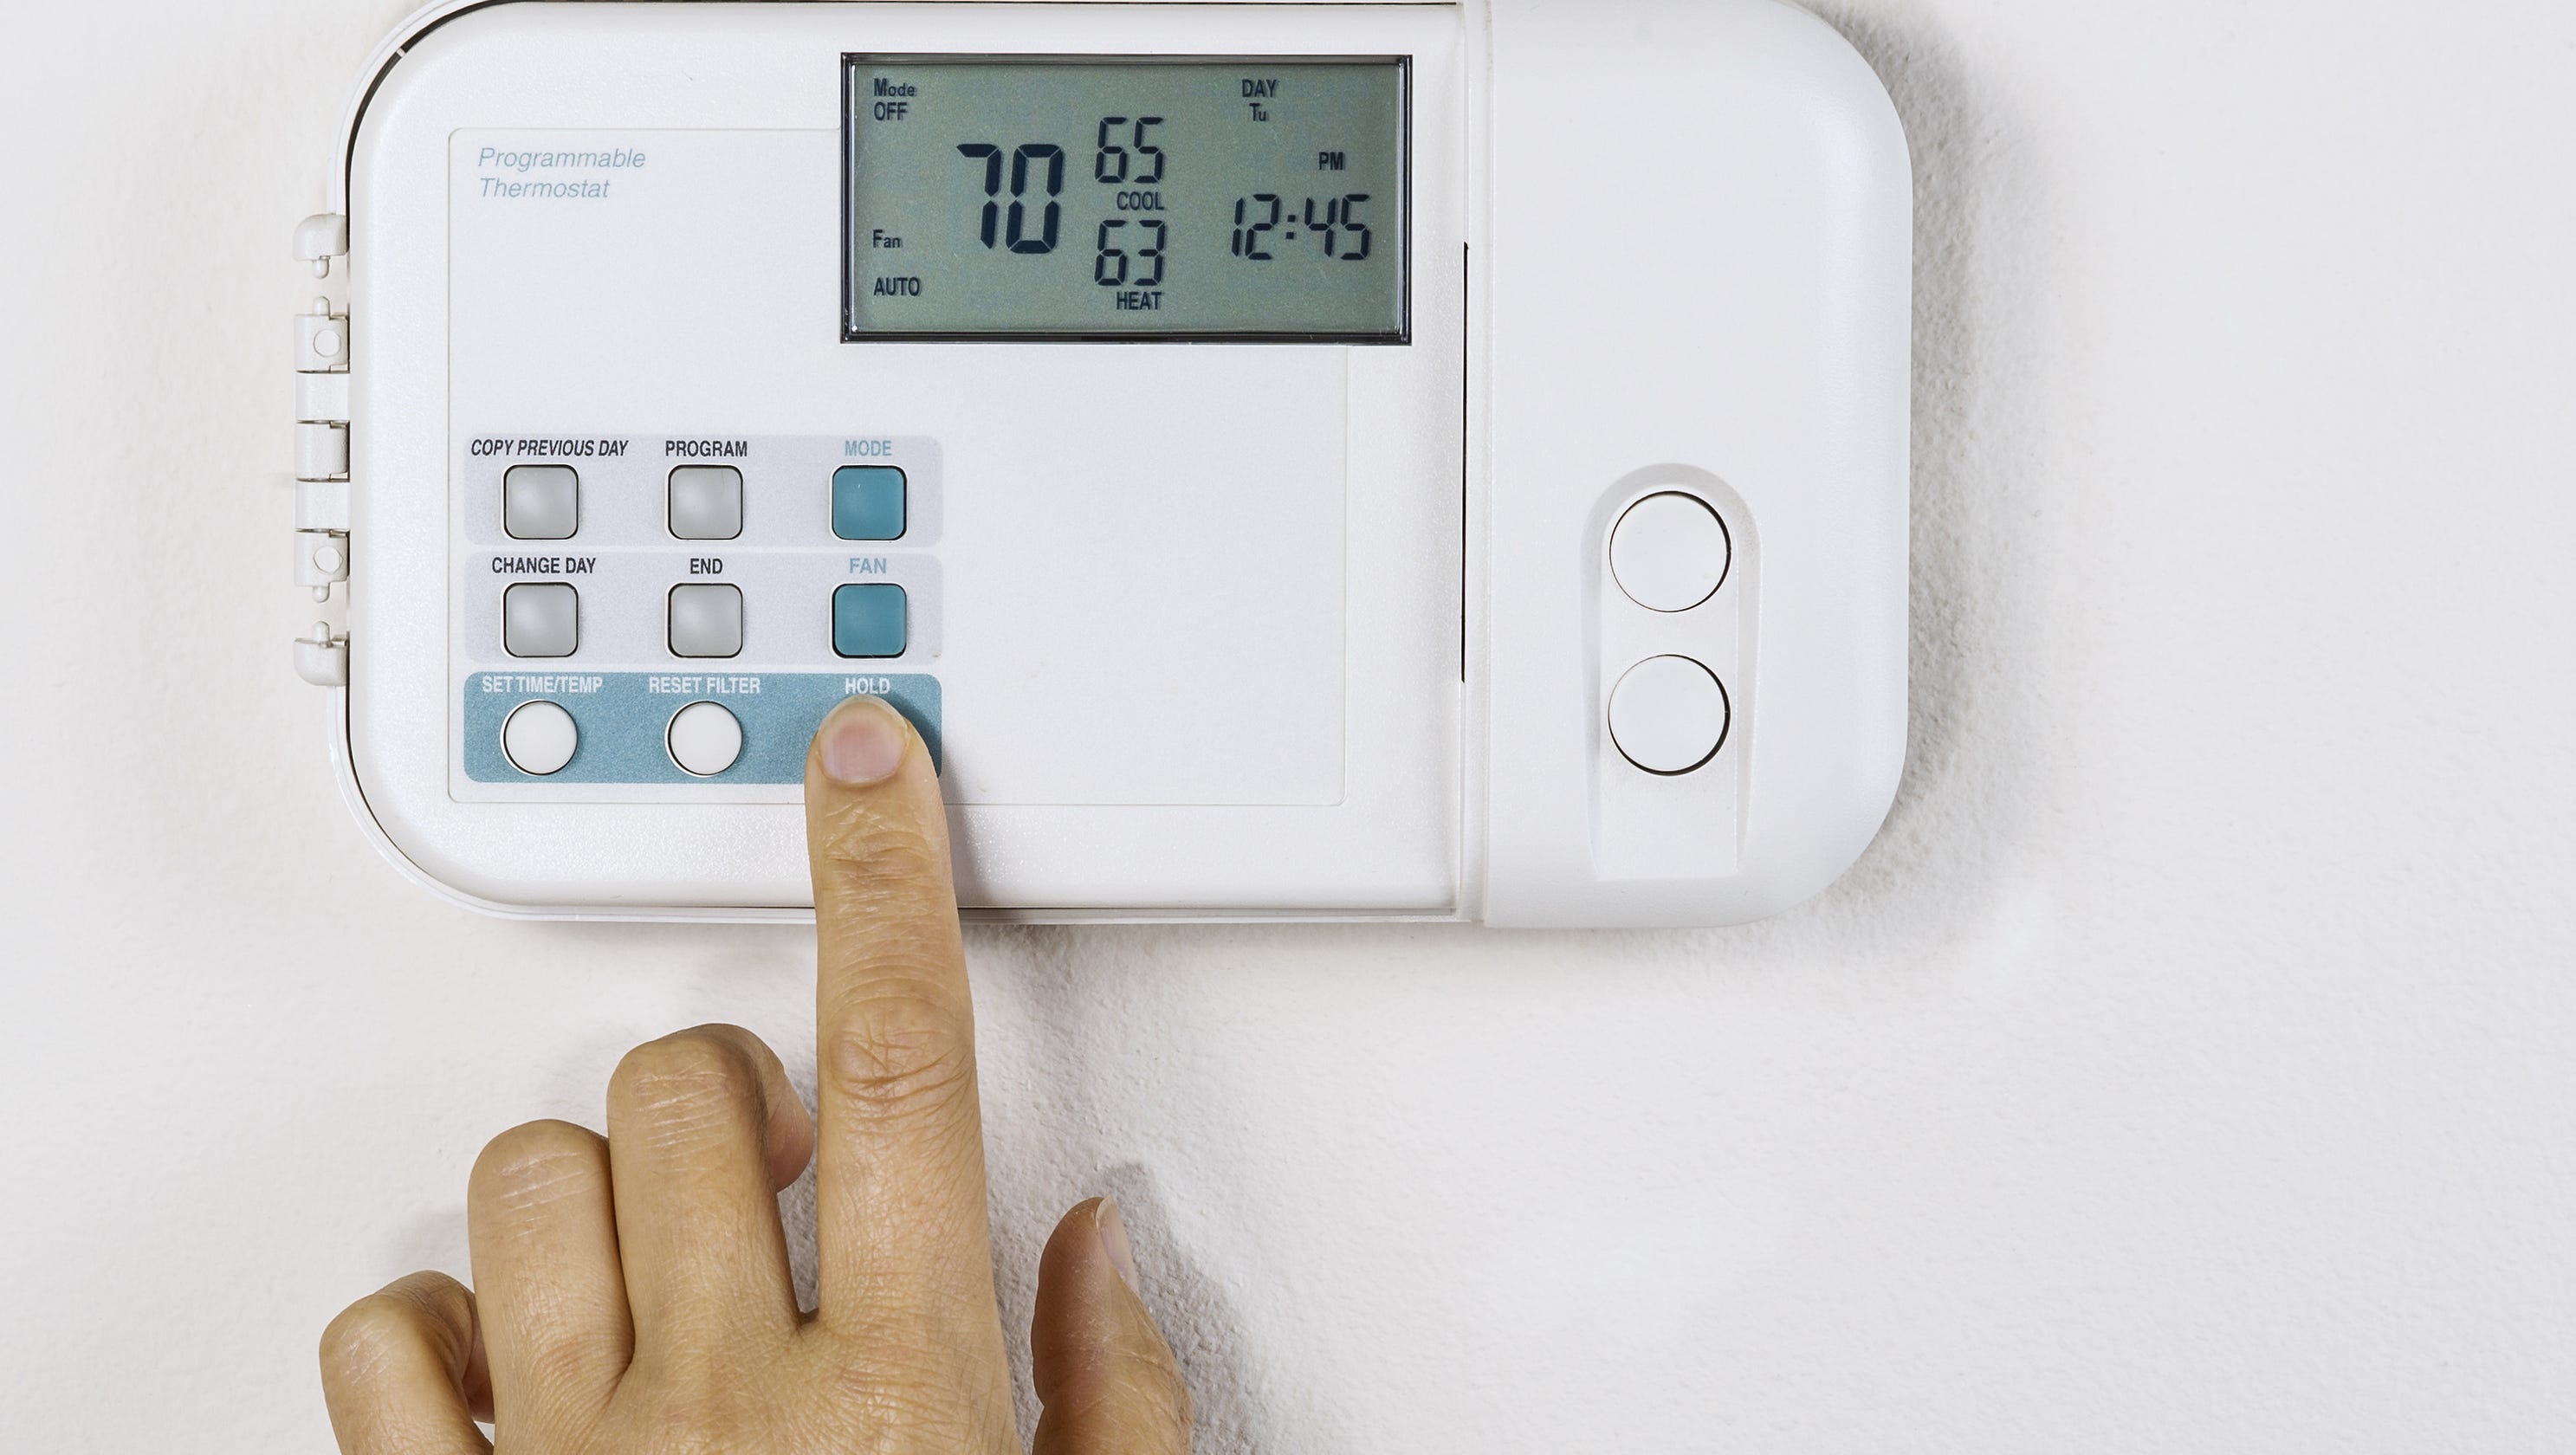 energy-star-says-your-thermostat-should-be-set-at-78-degrees